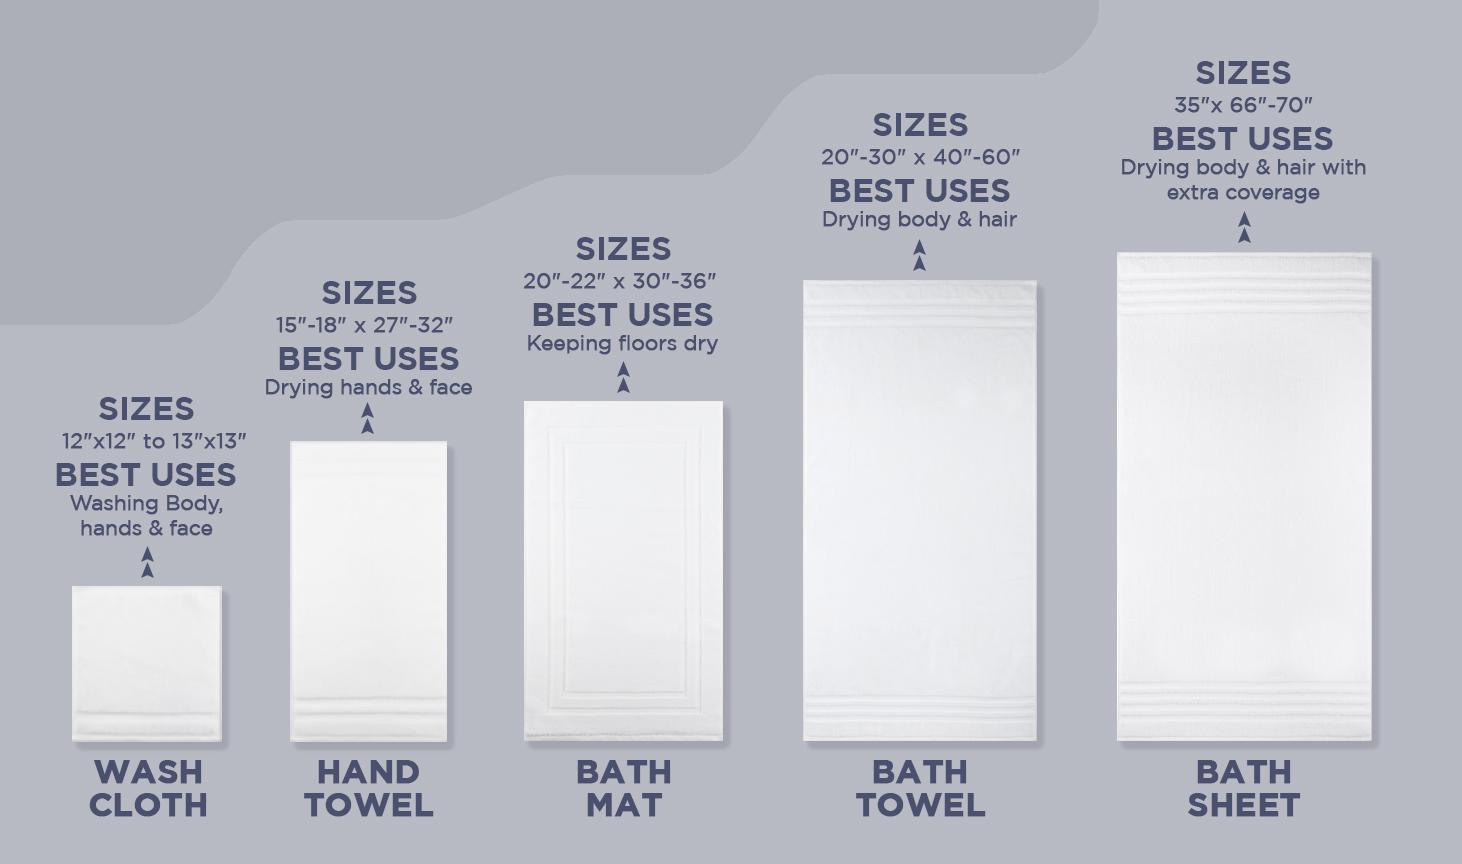 What Are Bath Sheets? Why You Need Them & Where to Buy Them